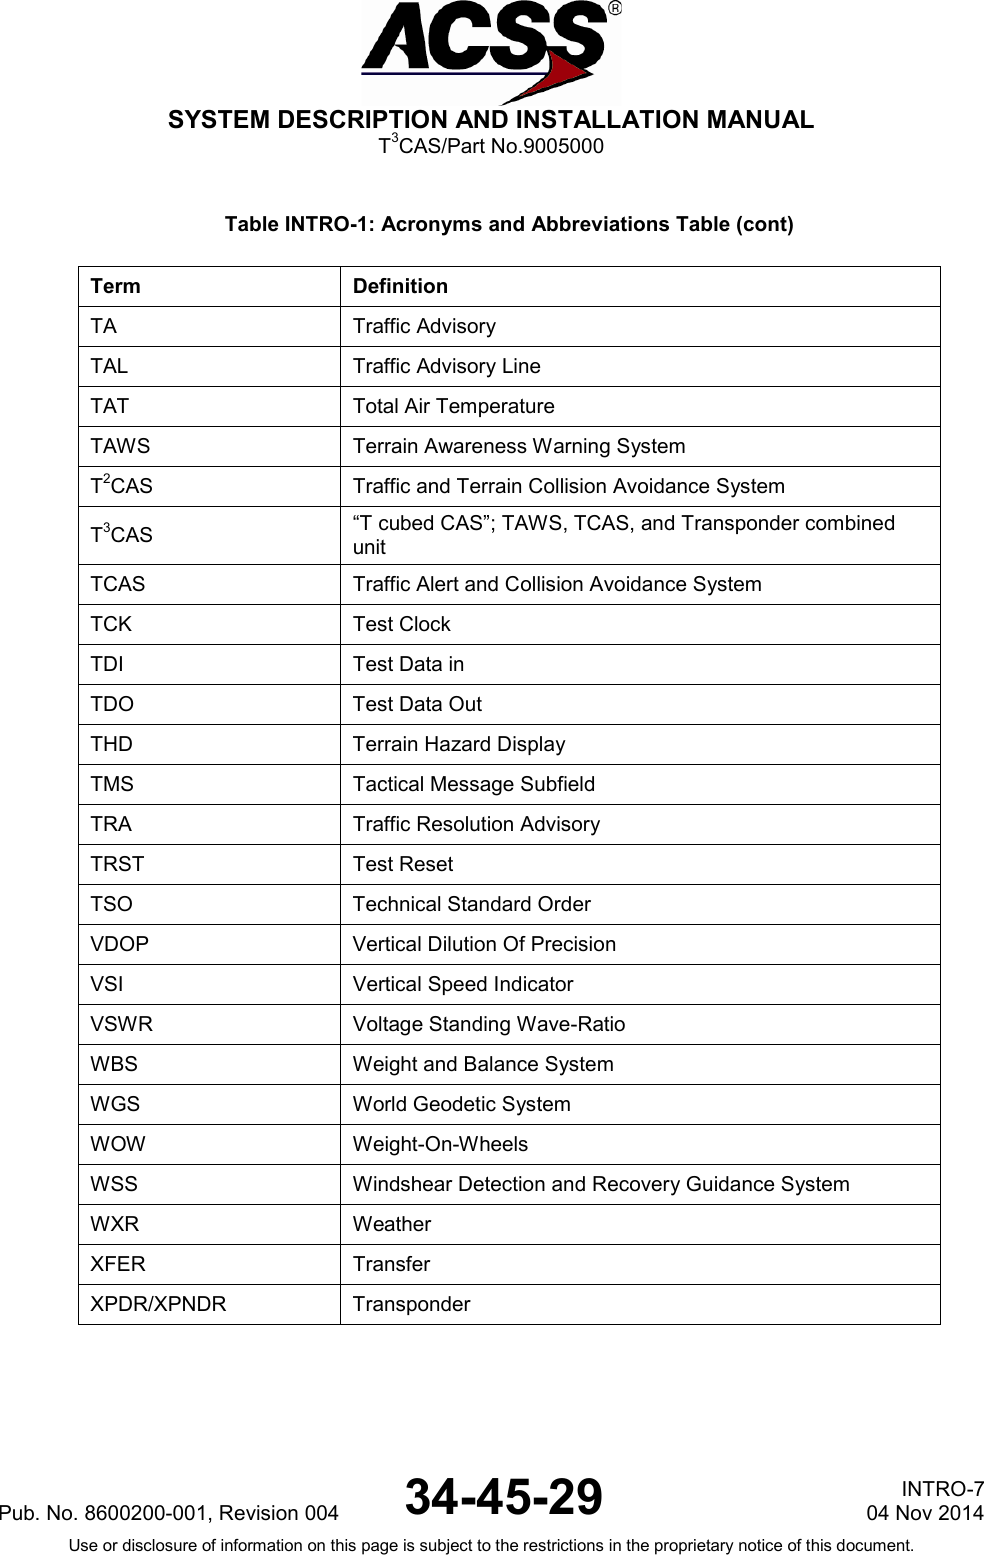  SYSTEM DESCRIPTION AND INSTALLATION MANUAL T3CAS/Part No.9005000 Table INTRO-1: Acronyms and Abbreviations Table (cont) Term Definition TA Traffic Advisory TAL Traffic Advisory Line TAT Total Air Temperature TAWS Terrain Awareness Warning System T2CAS Traffic and Terrain Collision Avoidance System T3CAS “T cubed CAS”; TAWS, TCAS, and Transponder combined unit TCAS Traffic Alert and Collision Avoidance System TCK Test Clock TDI Test Data in TDO Test Data Out THD Terrain Hazard Display TMS Tactical Message Subfield TRA Traffic Resolution Advisory TRST Test Reset TSO Technical Standard Order VDOP Vertical Dilution Of Precision VSI Vertical Speed Indicator VSWR Voltage Standing Wave-Ratio WBS Weight and Balance System WGS World Geodetic System WOW  Weight-On-Wheels WSS Windshear Detection and Recovery Guidance System WXR Weather XFER Transfer XPDR/XPNDR  Transponder Pub. No. 8600200-001, Revision 004 34-45-29 INTRO-7 04 Nov 2014 Use or disclosure of information on this page is subject to the restrictions in the proprietary notice of this document.  